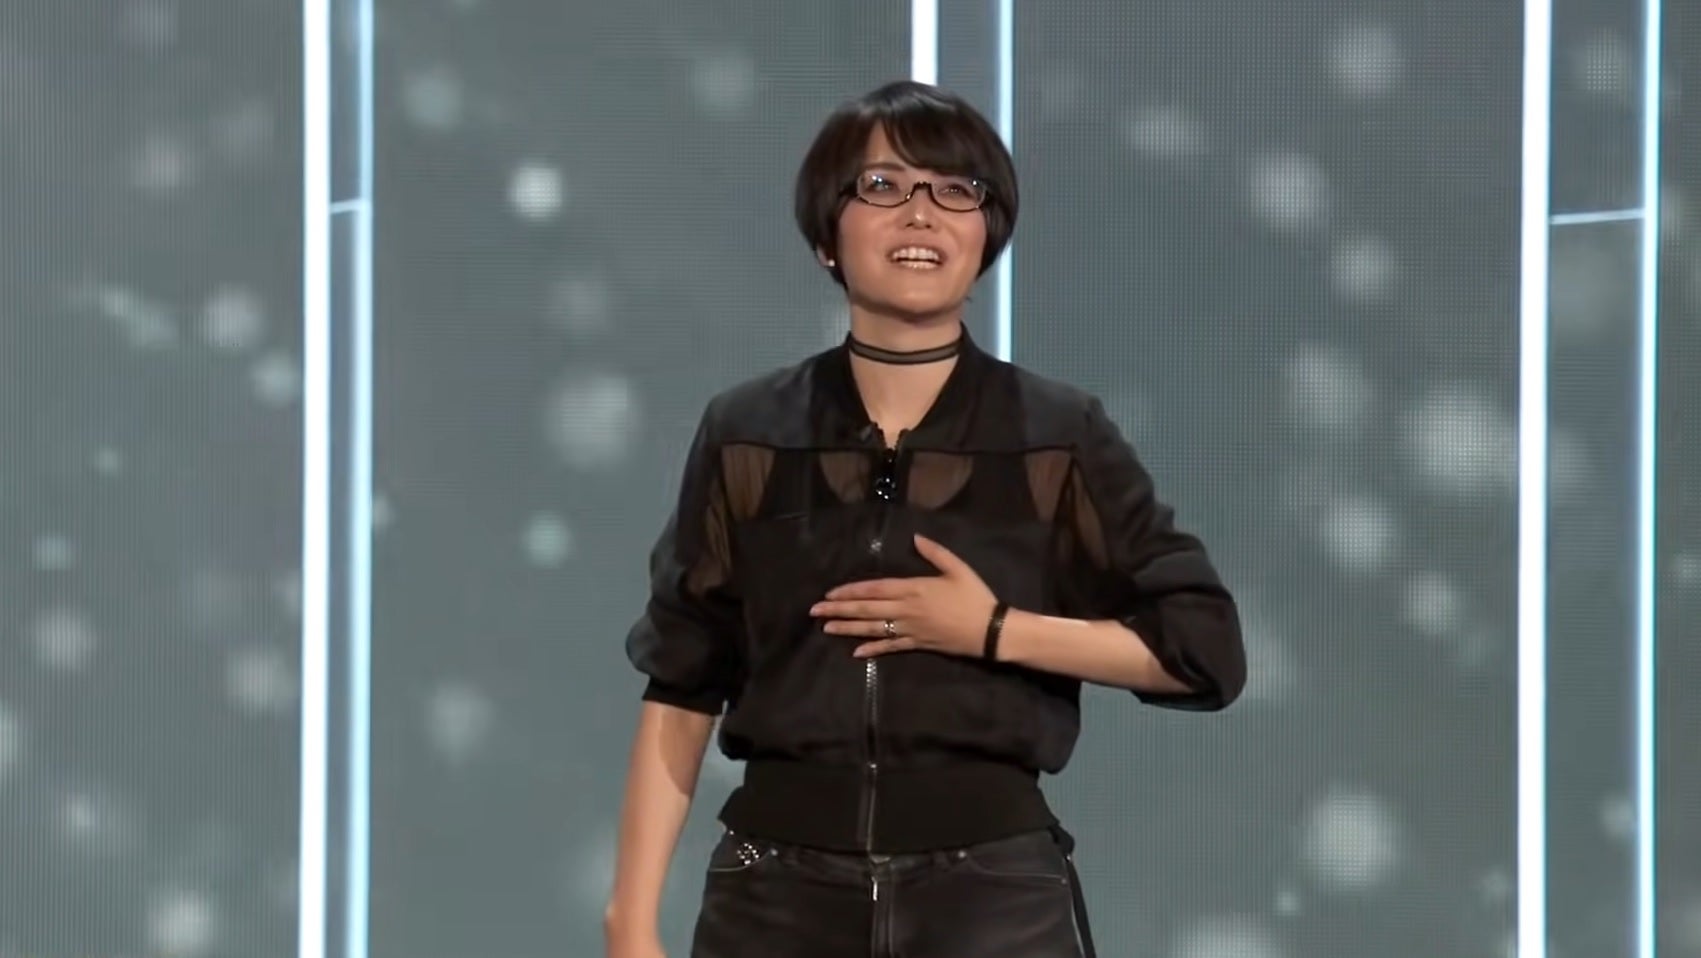 Ikumi Nakamura of E3’s “scary” fame is now opening her own studio